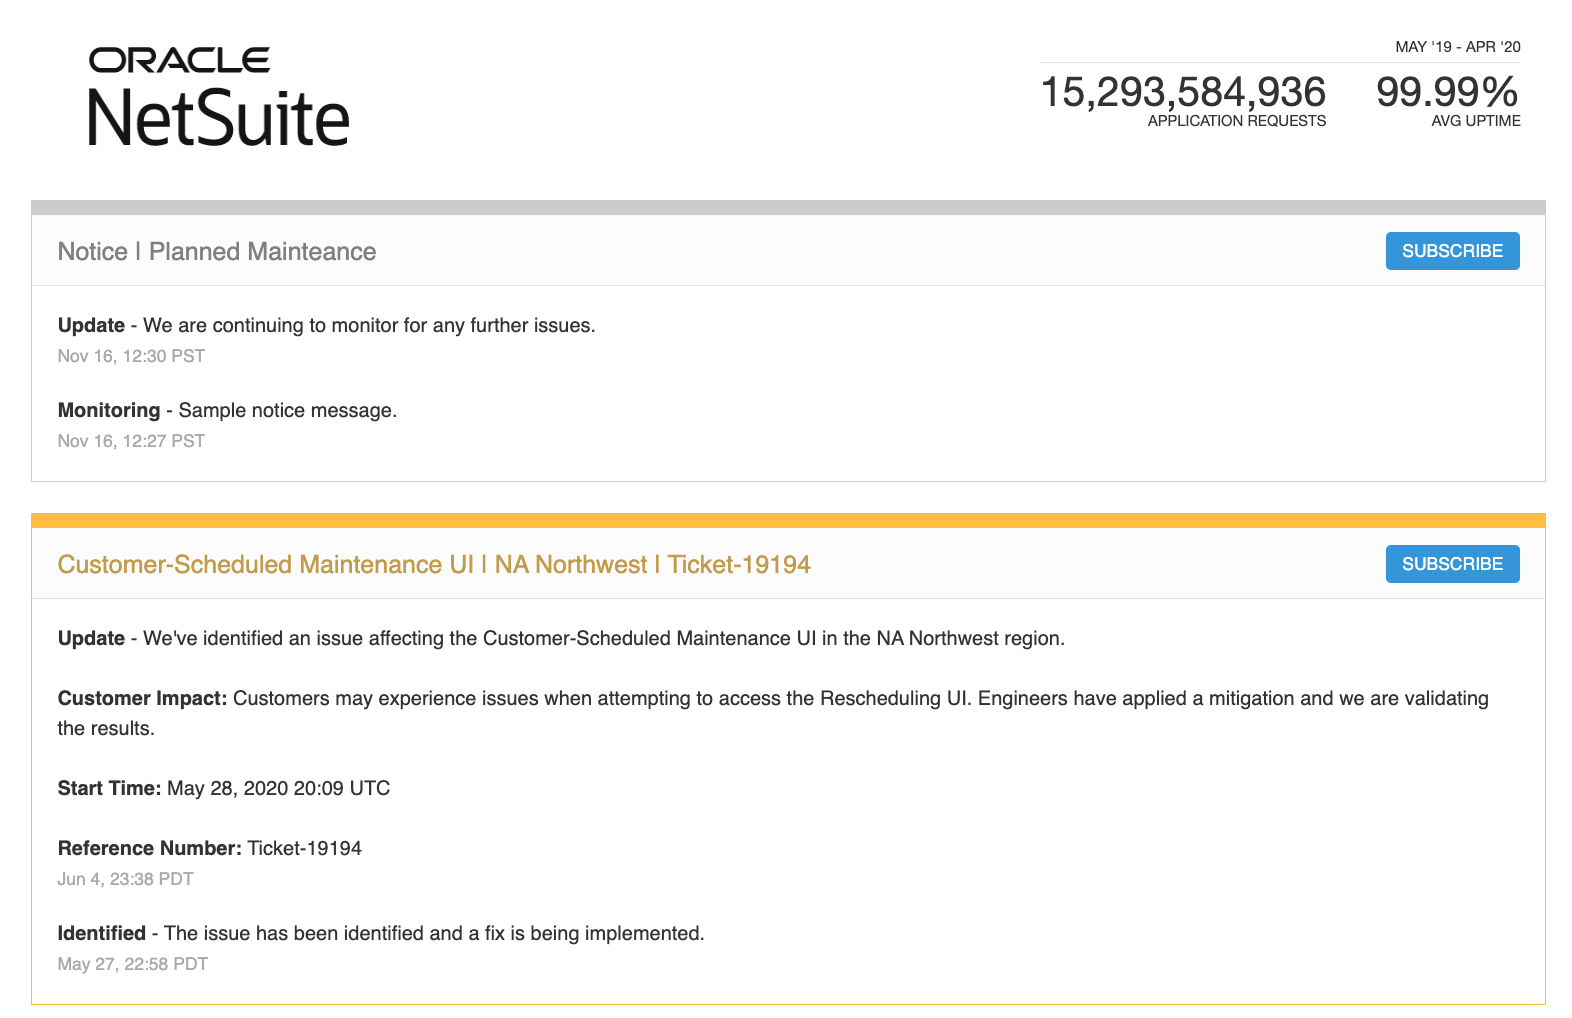 Notices and planned maintenance announcements on the NetSuite Service Status page.